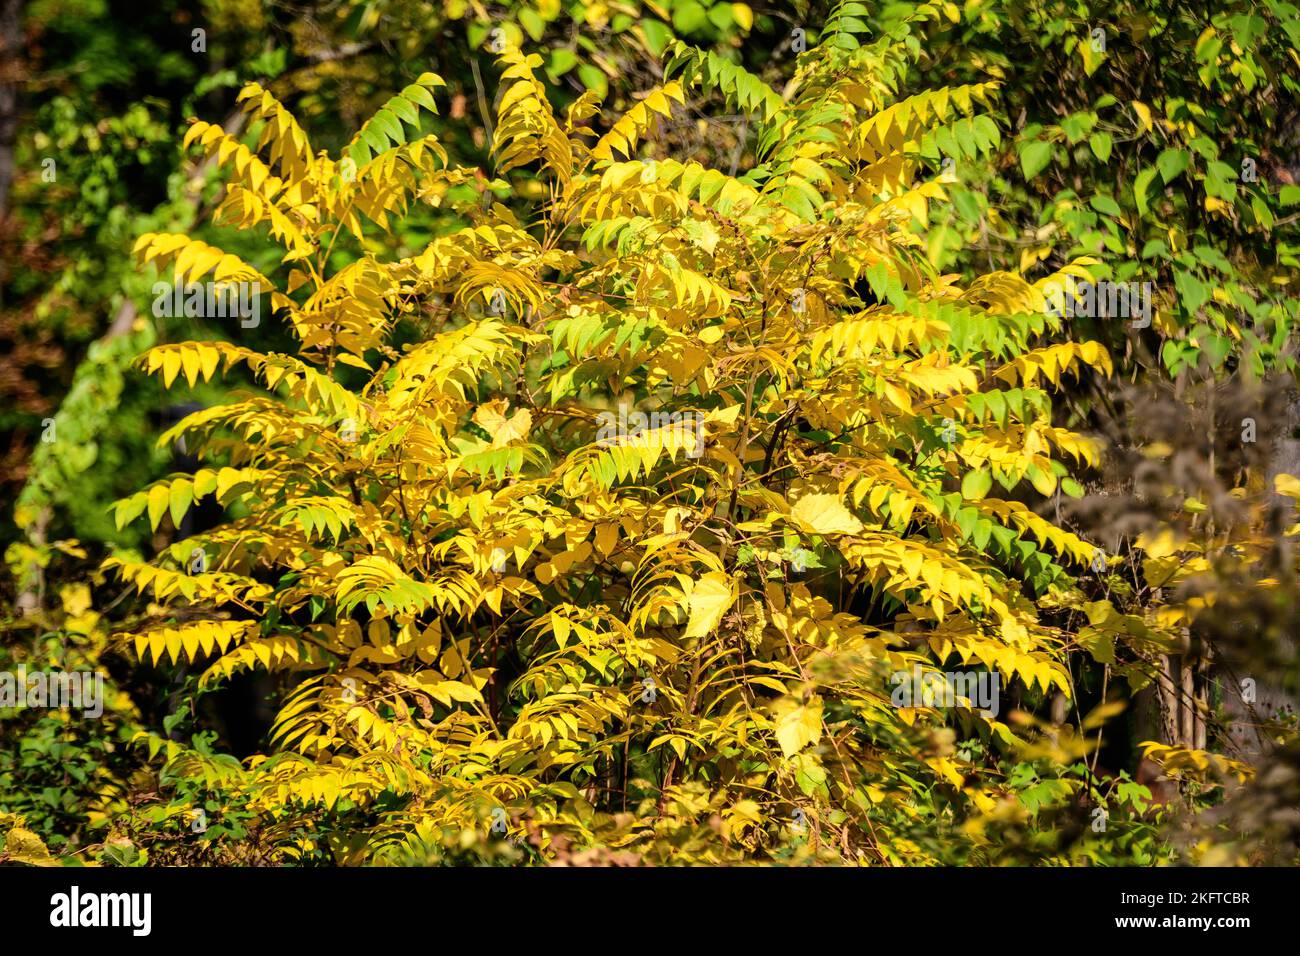 Minimalist monochrome background with many large yellow and green leaves on tree branches  in a garden in a sunny autumn day Stock Photo